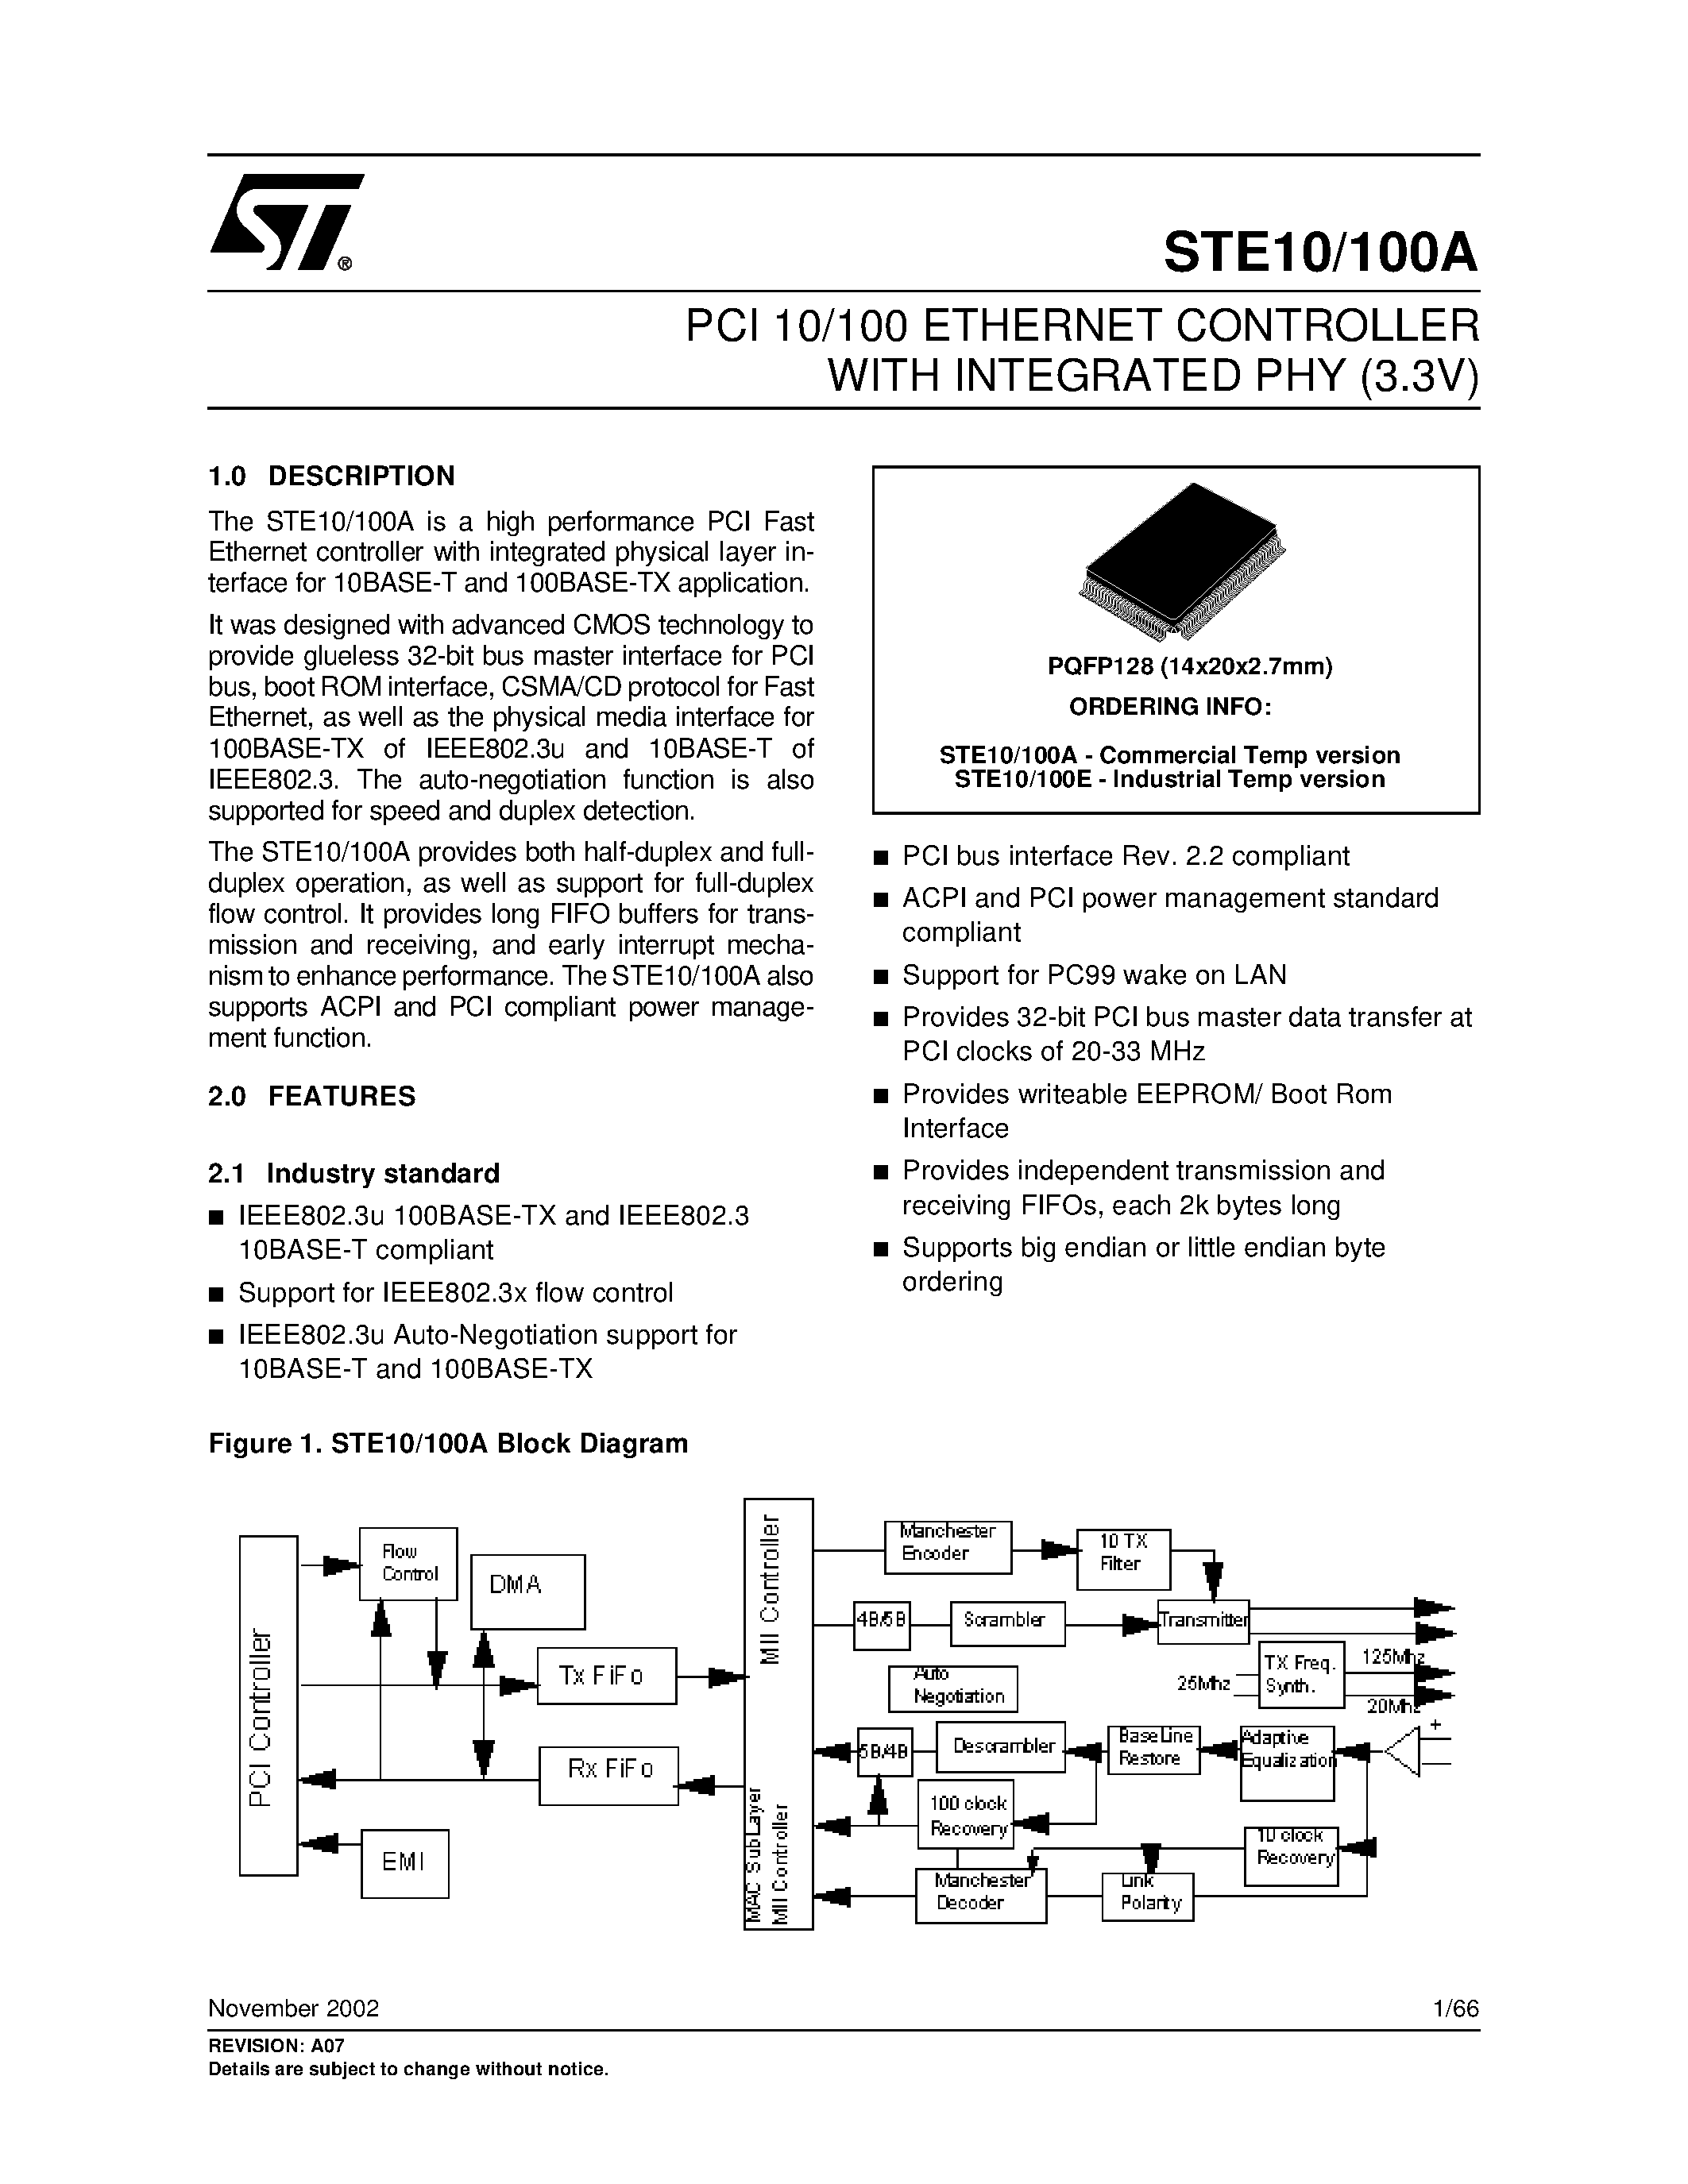 Datasheet STE10/100A - PCI 10/100 ETHERNET CONTROLLER WITH INTEGRATED PHY 3.3V page 1